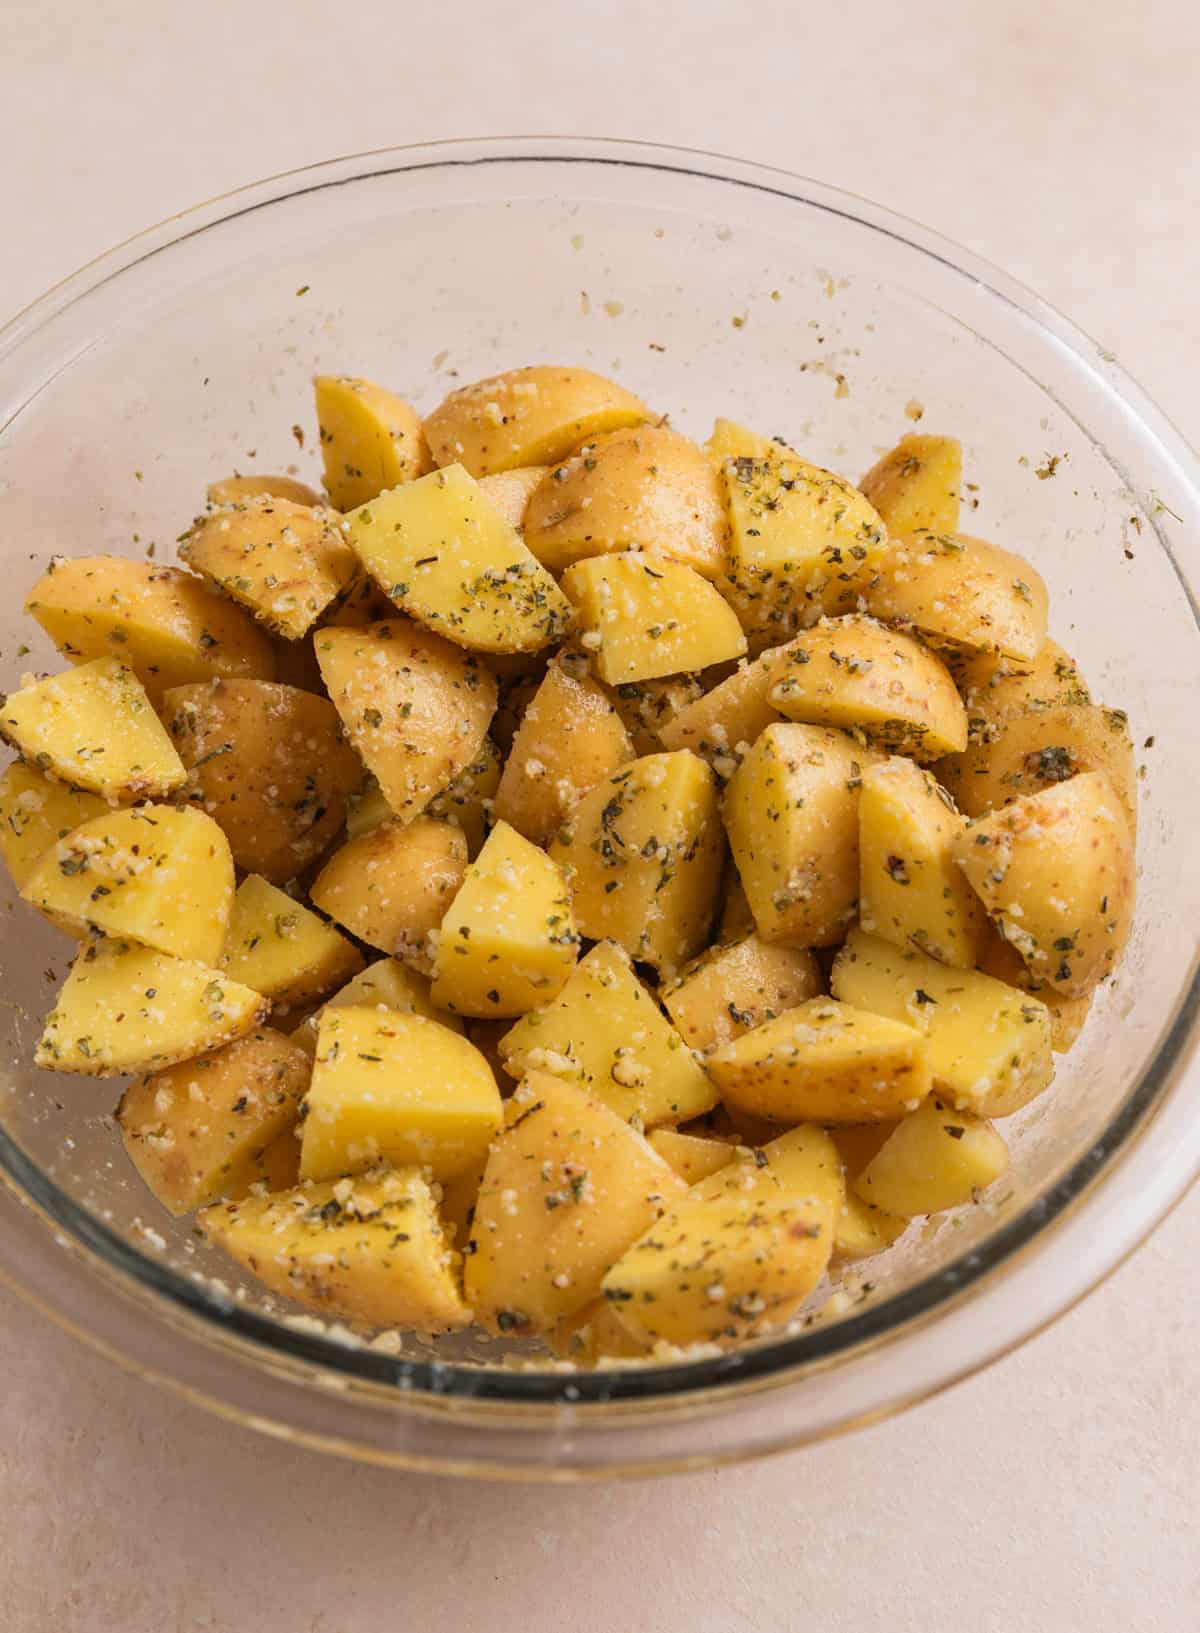 Oil and parmesan coated potatoes.